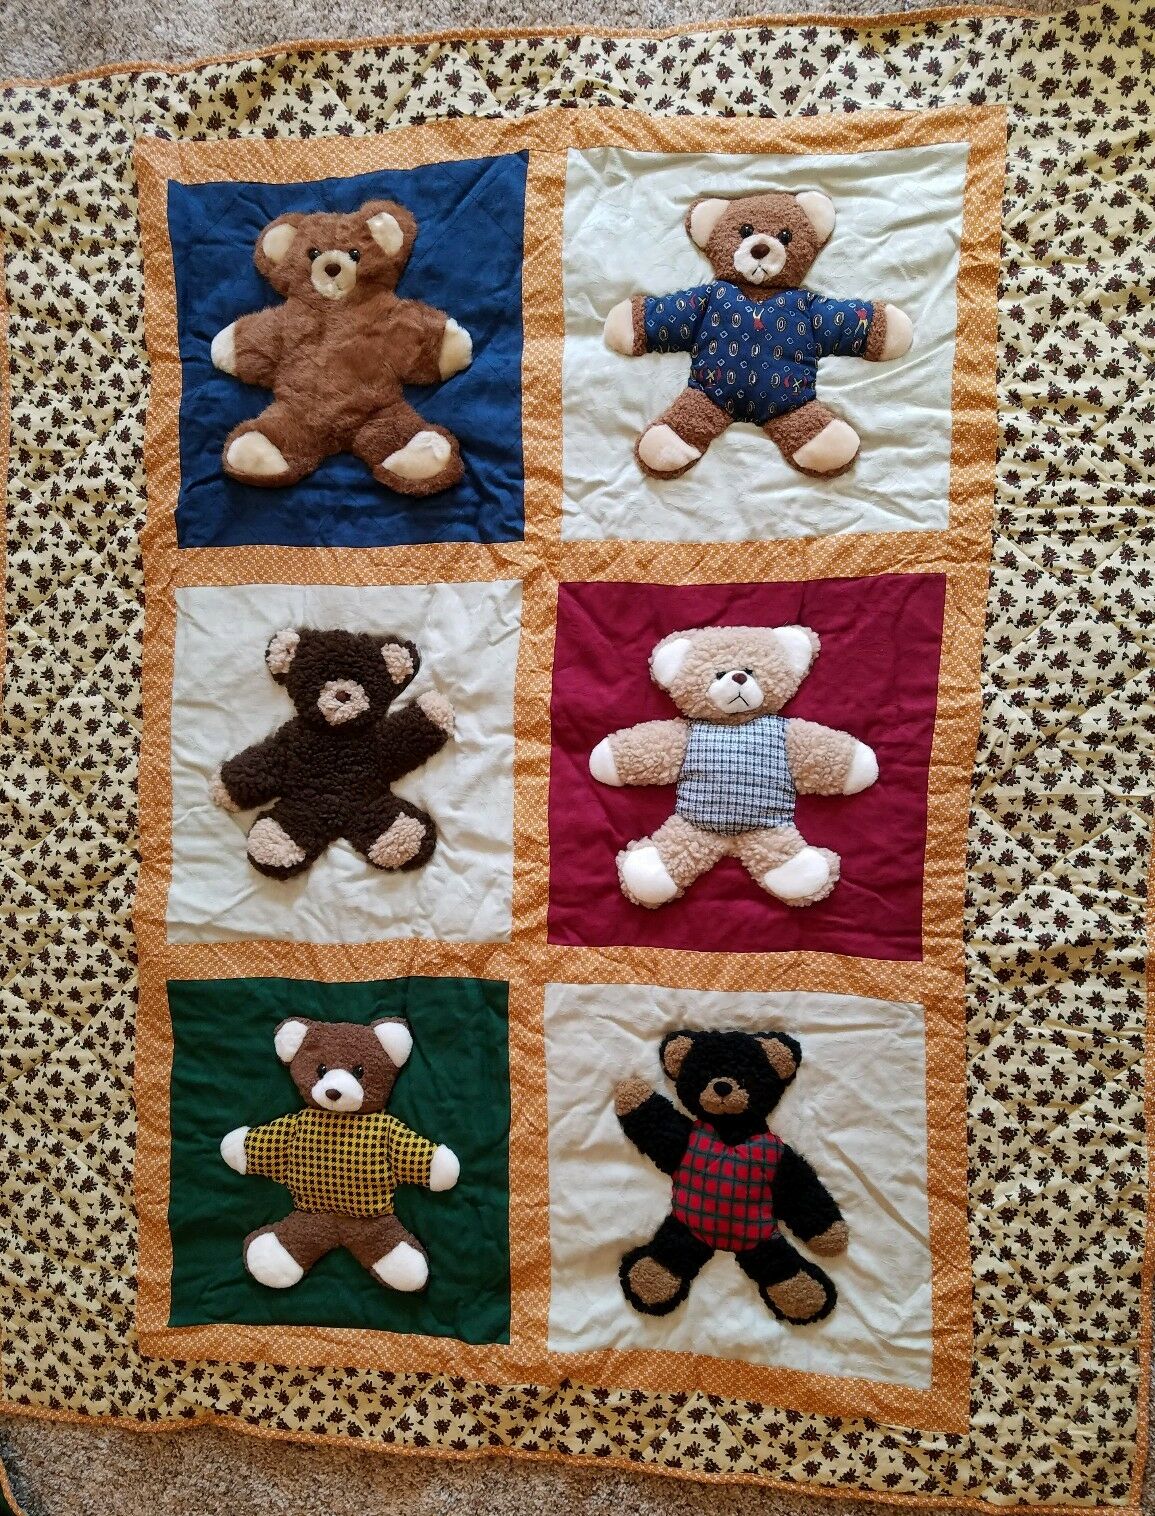 New! 3 Pc Teddy Bear Comforter With 2 Pillow Shams Six Different Cuddly Bears 3d